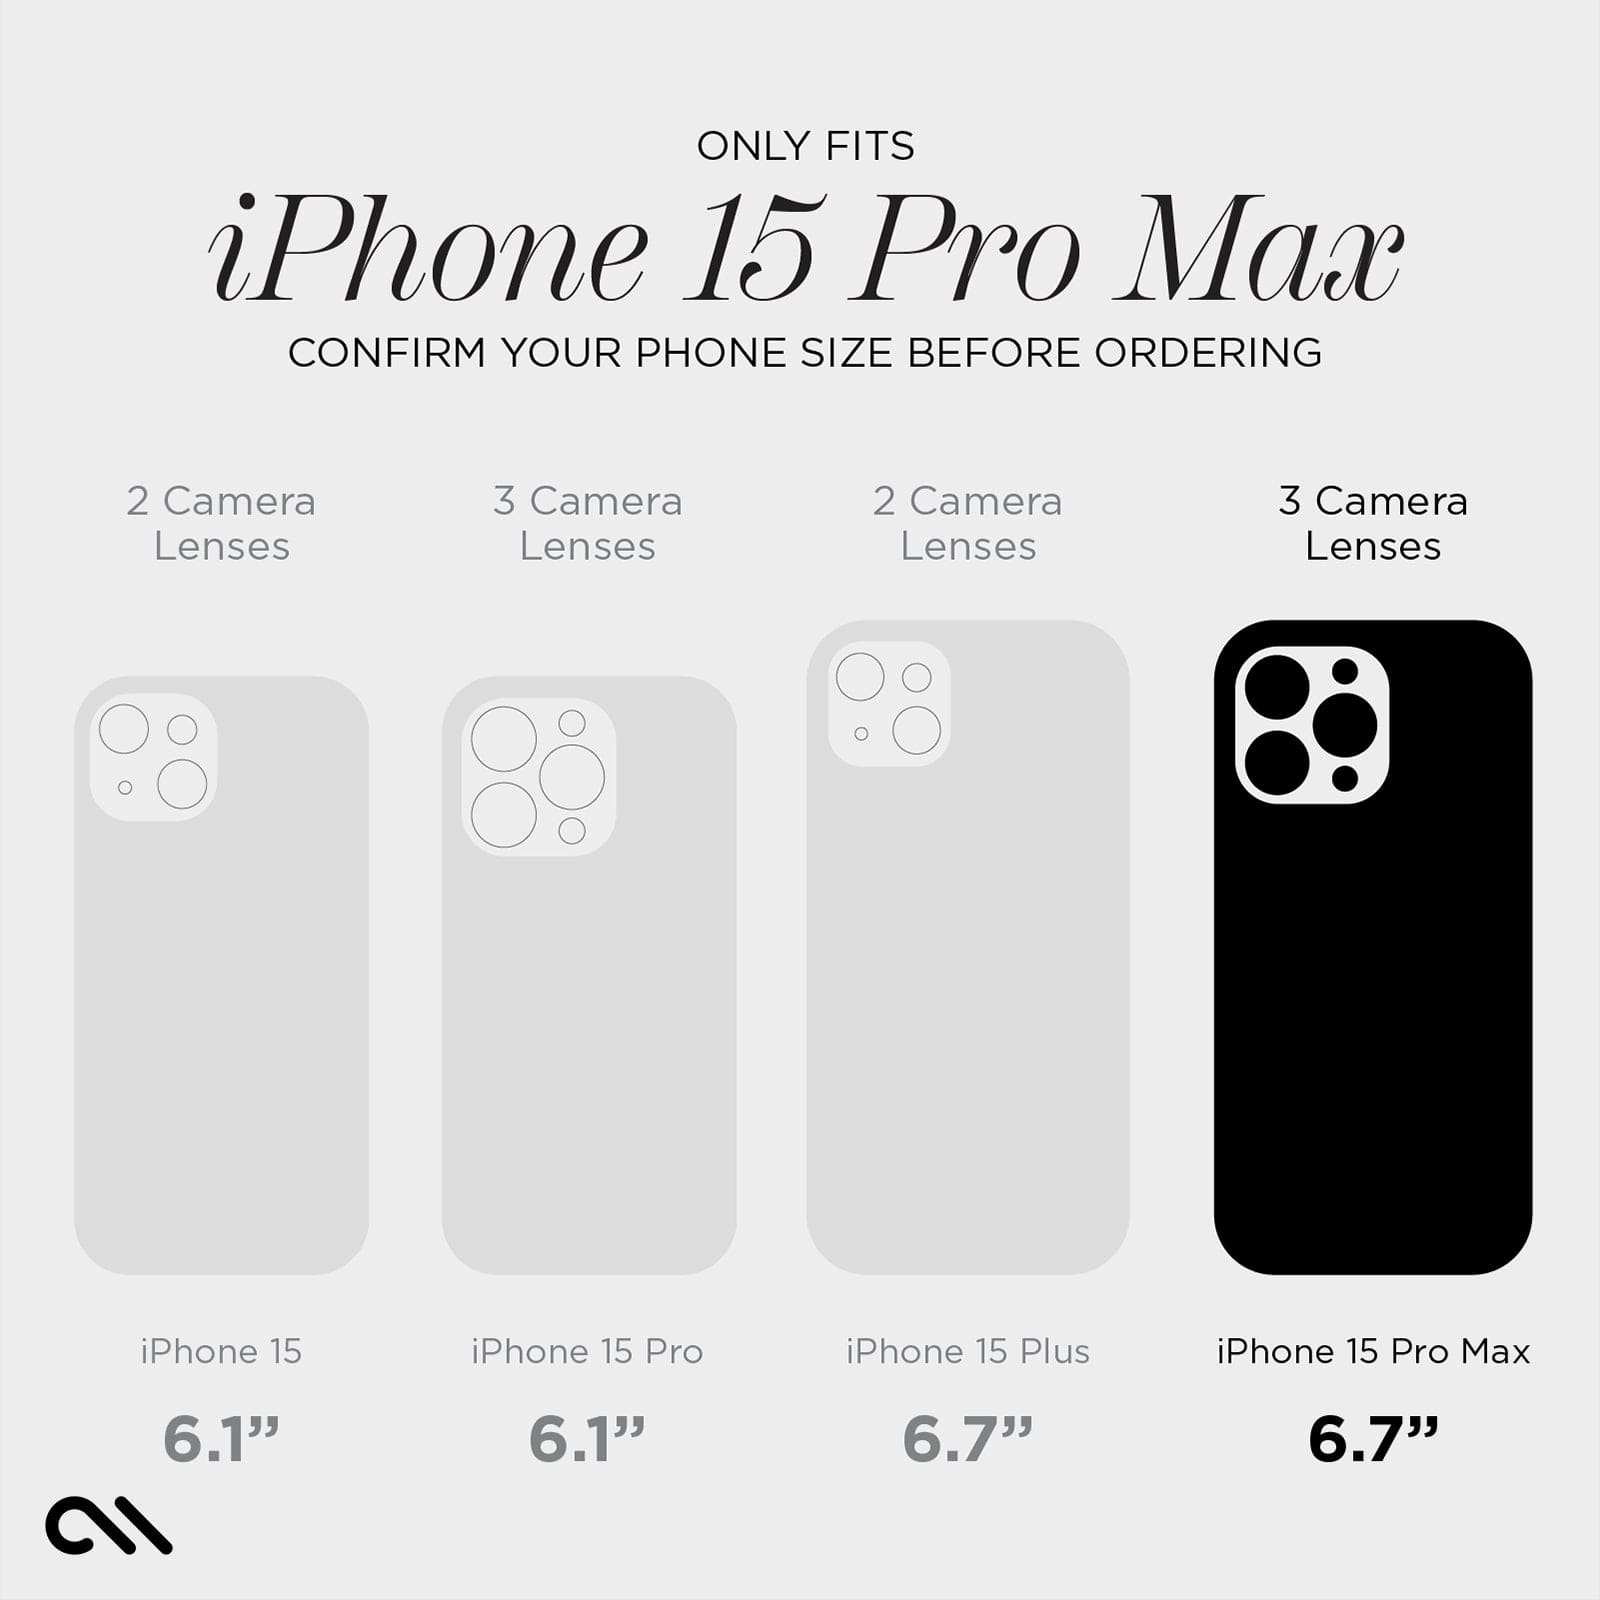 ONLY FITS IPHONE 15 PRO MAX. CONFIRM BEFORE ORDERING